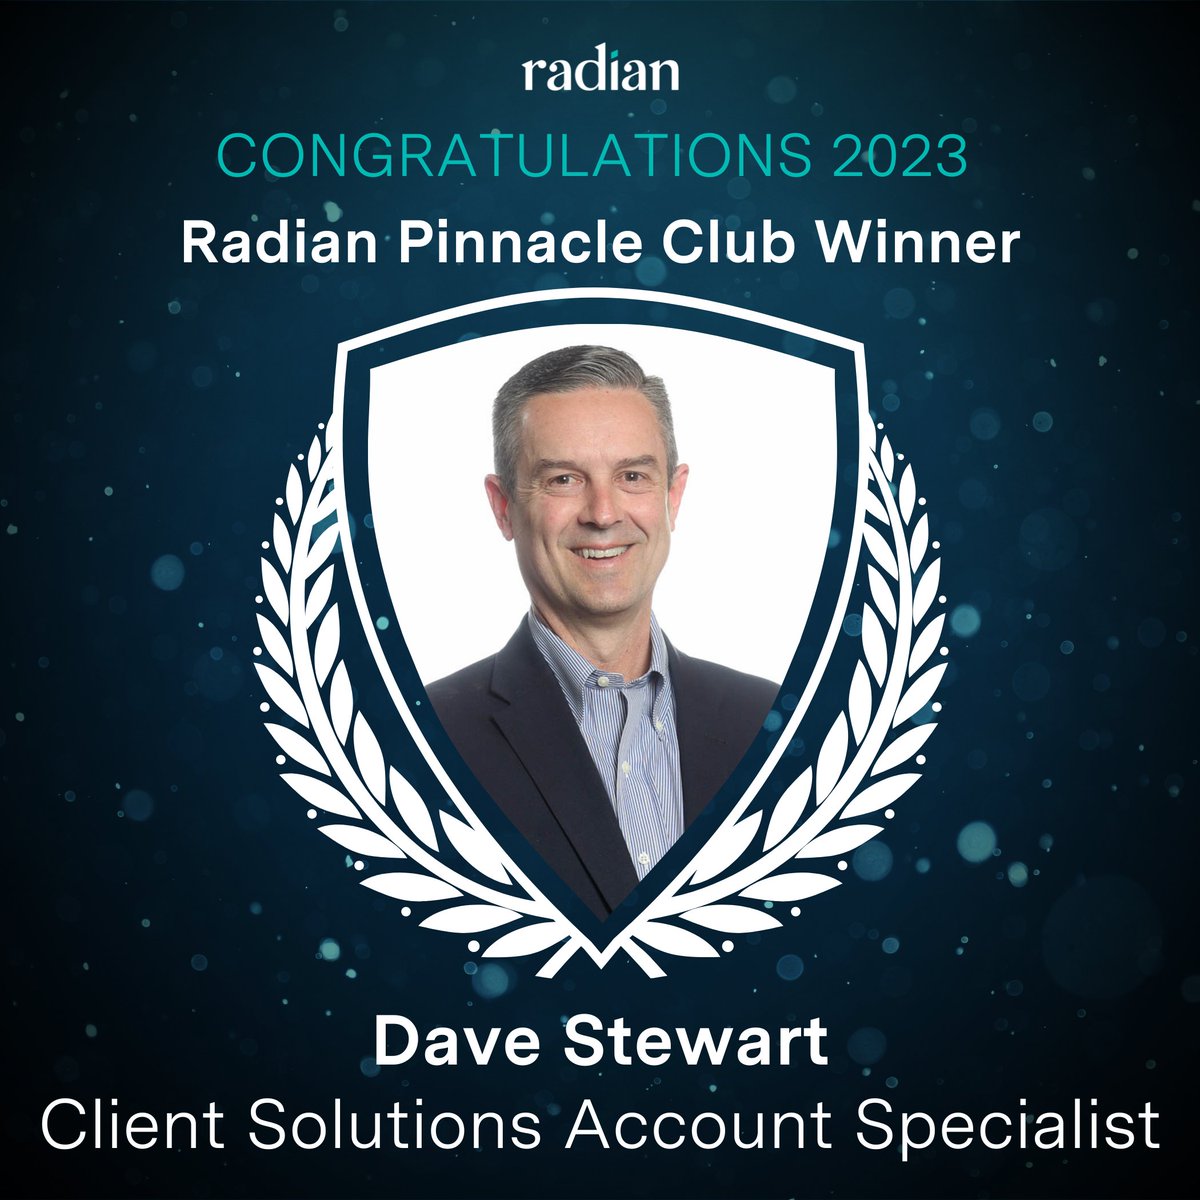 Meet Dave Stewart, Client Solutions Account Specialist and Pinnacle Club winner! Dave's top goal for the year is to be the main point of contact for his shared contacts and field partners at Radian. Congratulations, Dave! 🌟

#OneRadian #RadianPinnacleClub #PartnerToWin